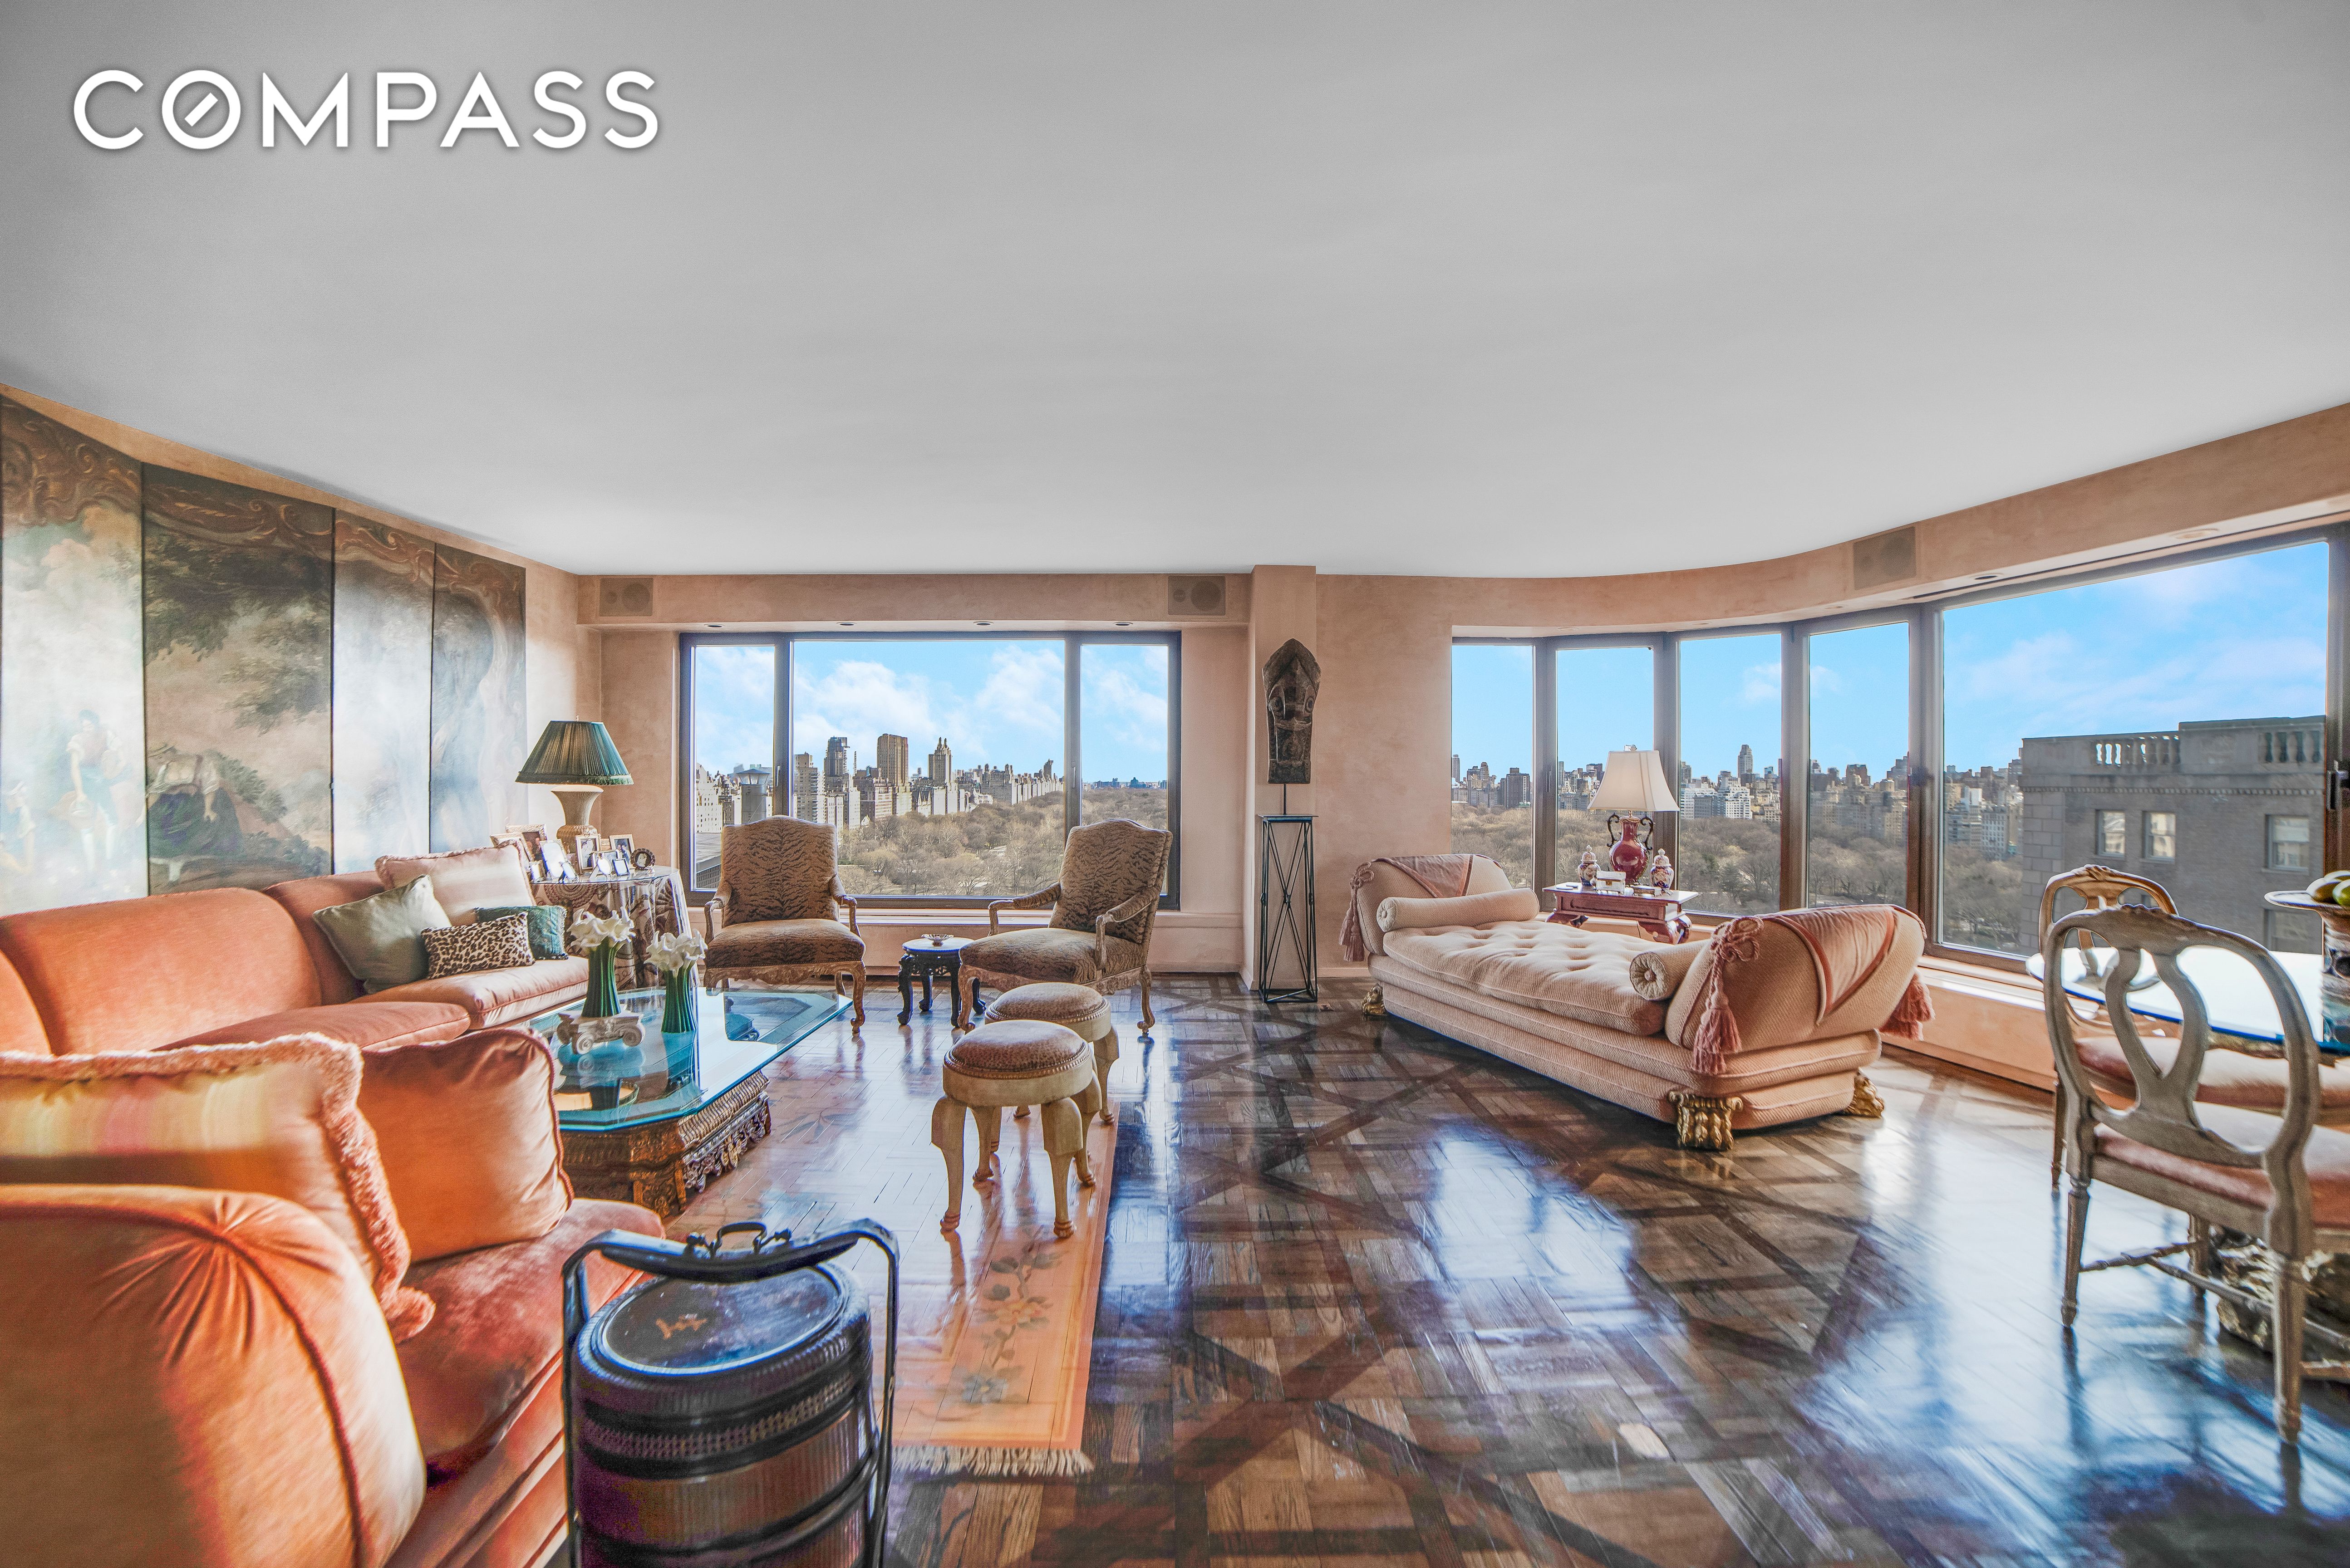 200 Central Park 24A, Central Park South, Midtown West, NYC - 2 Bedrooms  
2.5 Bathrooms  
5 Rooms - 